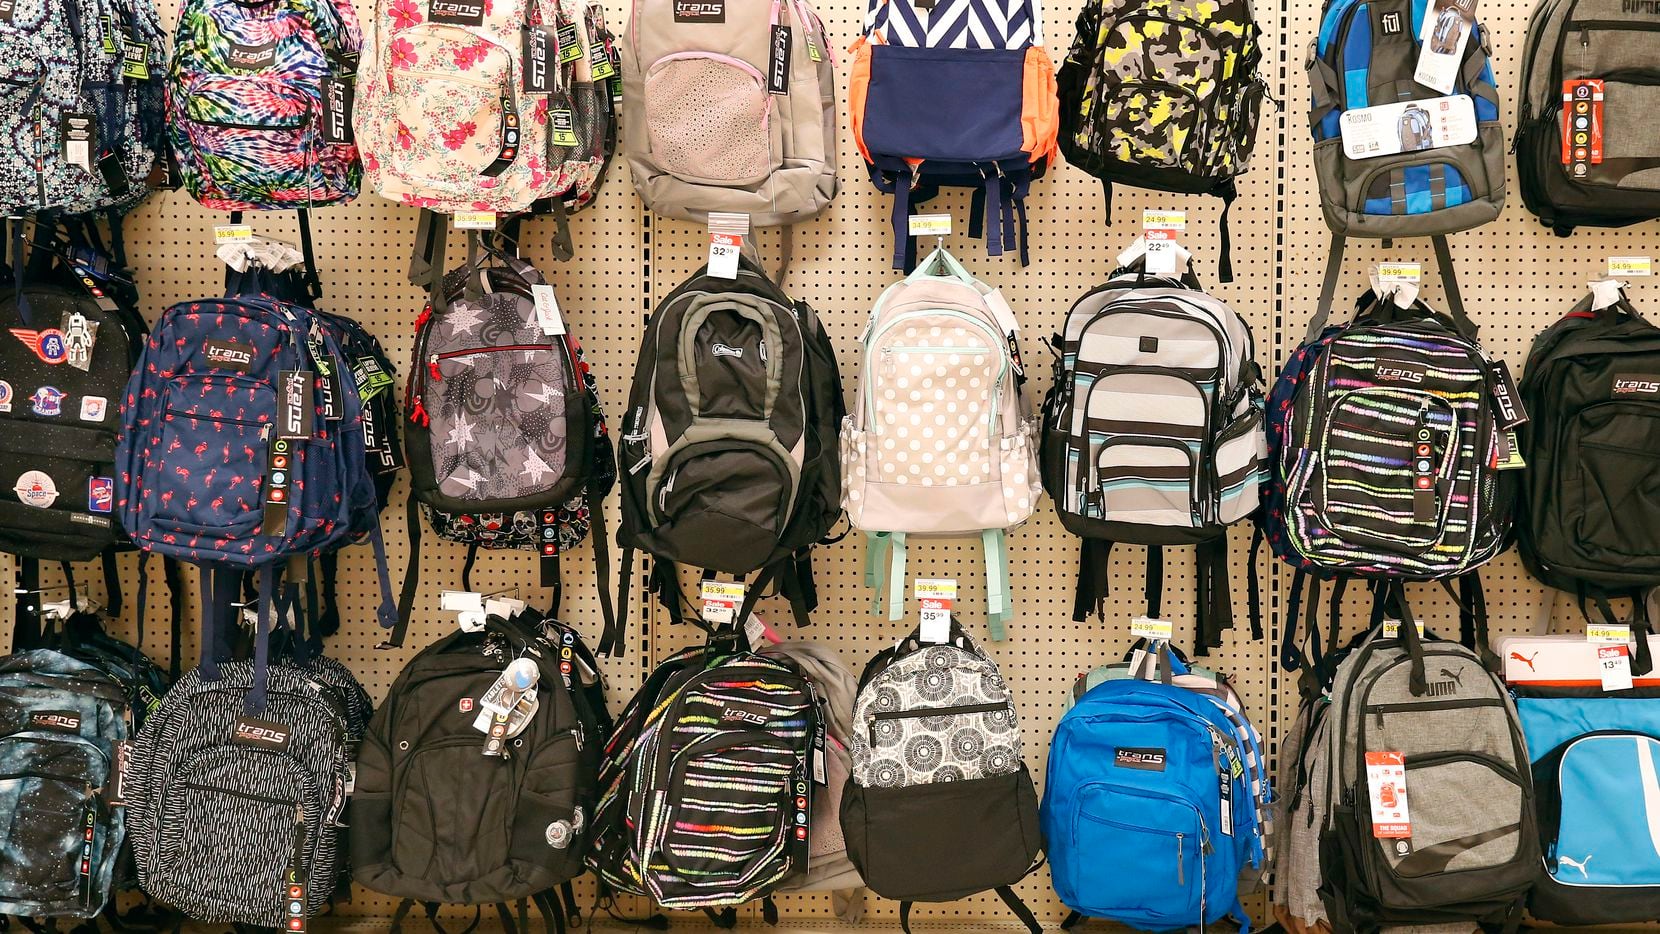 Irving organizations are now collecting backpacks and school supplies for low-income families.